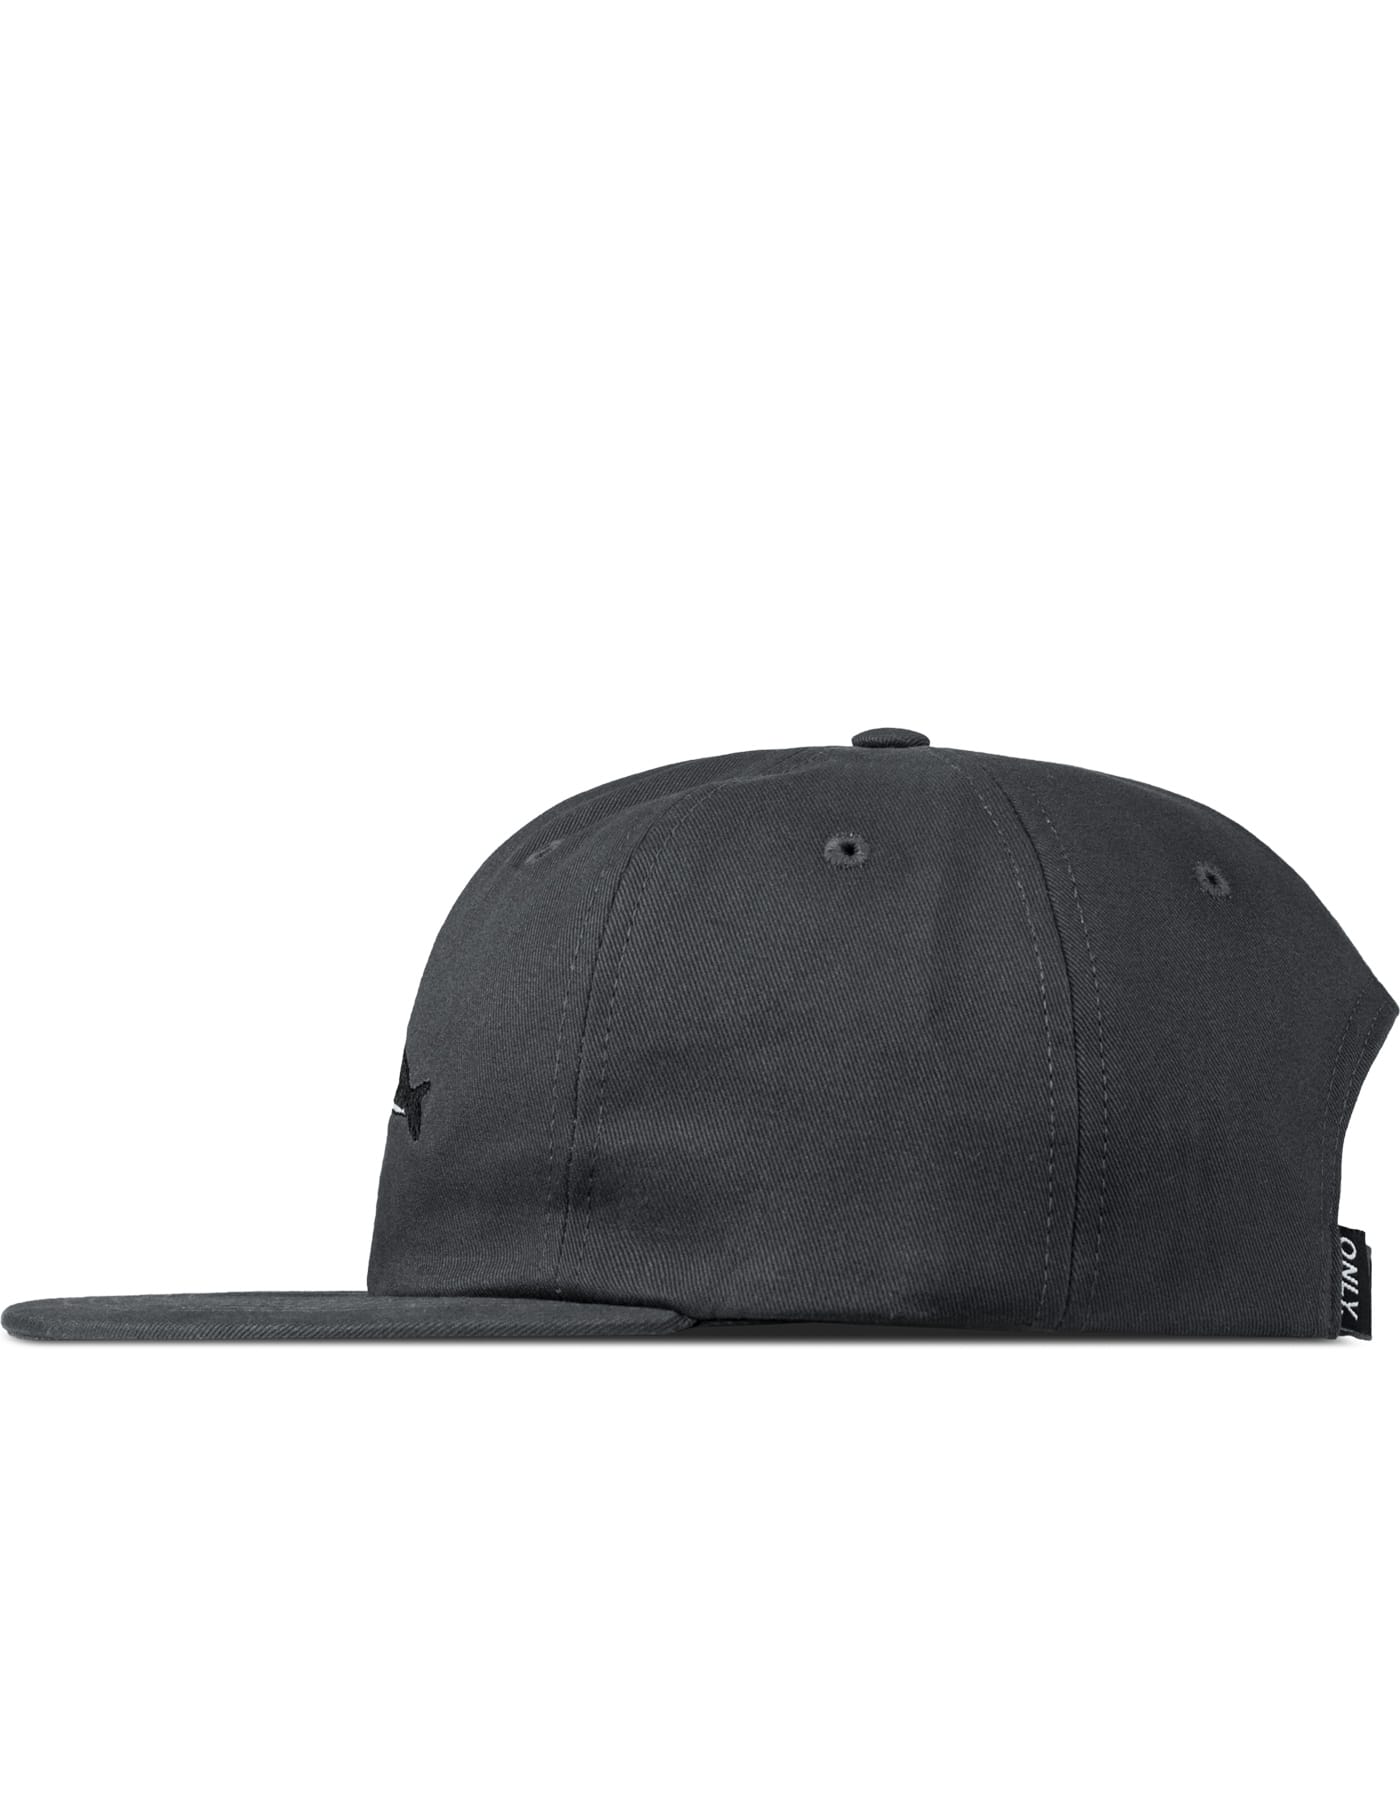 Only Ny - Orca Polo Hat | HBX - Globally Curated Fashion and 